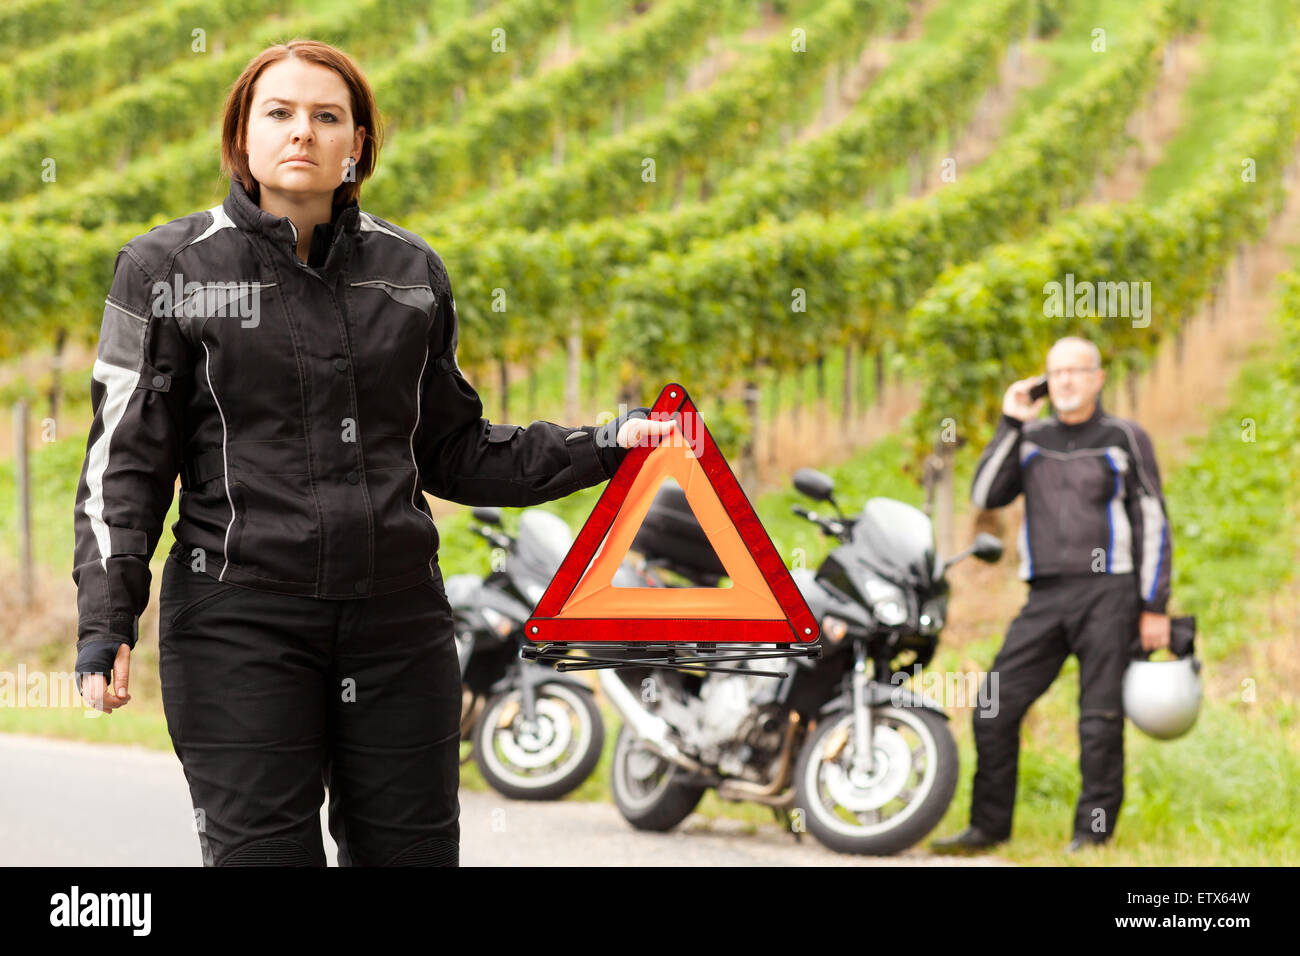 Motorcyclist with warning triangle Stock Photo